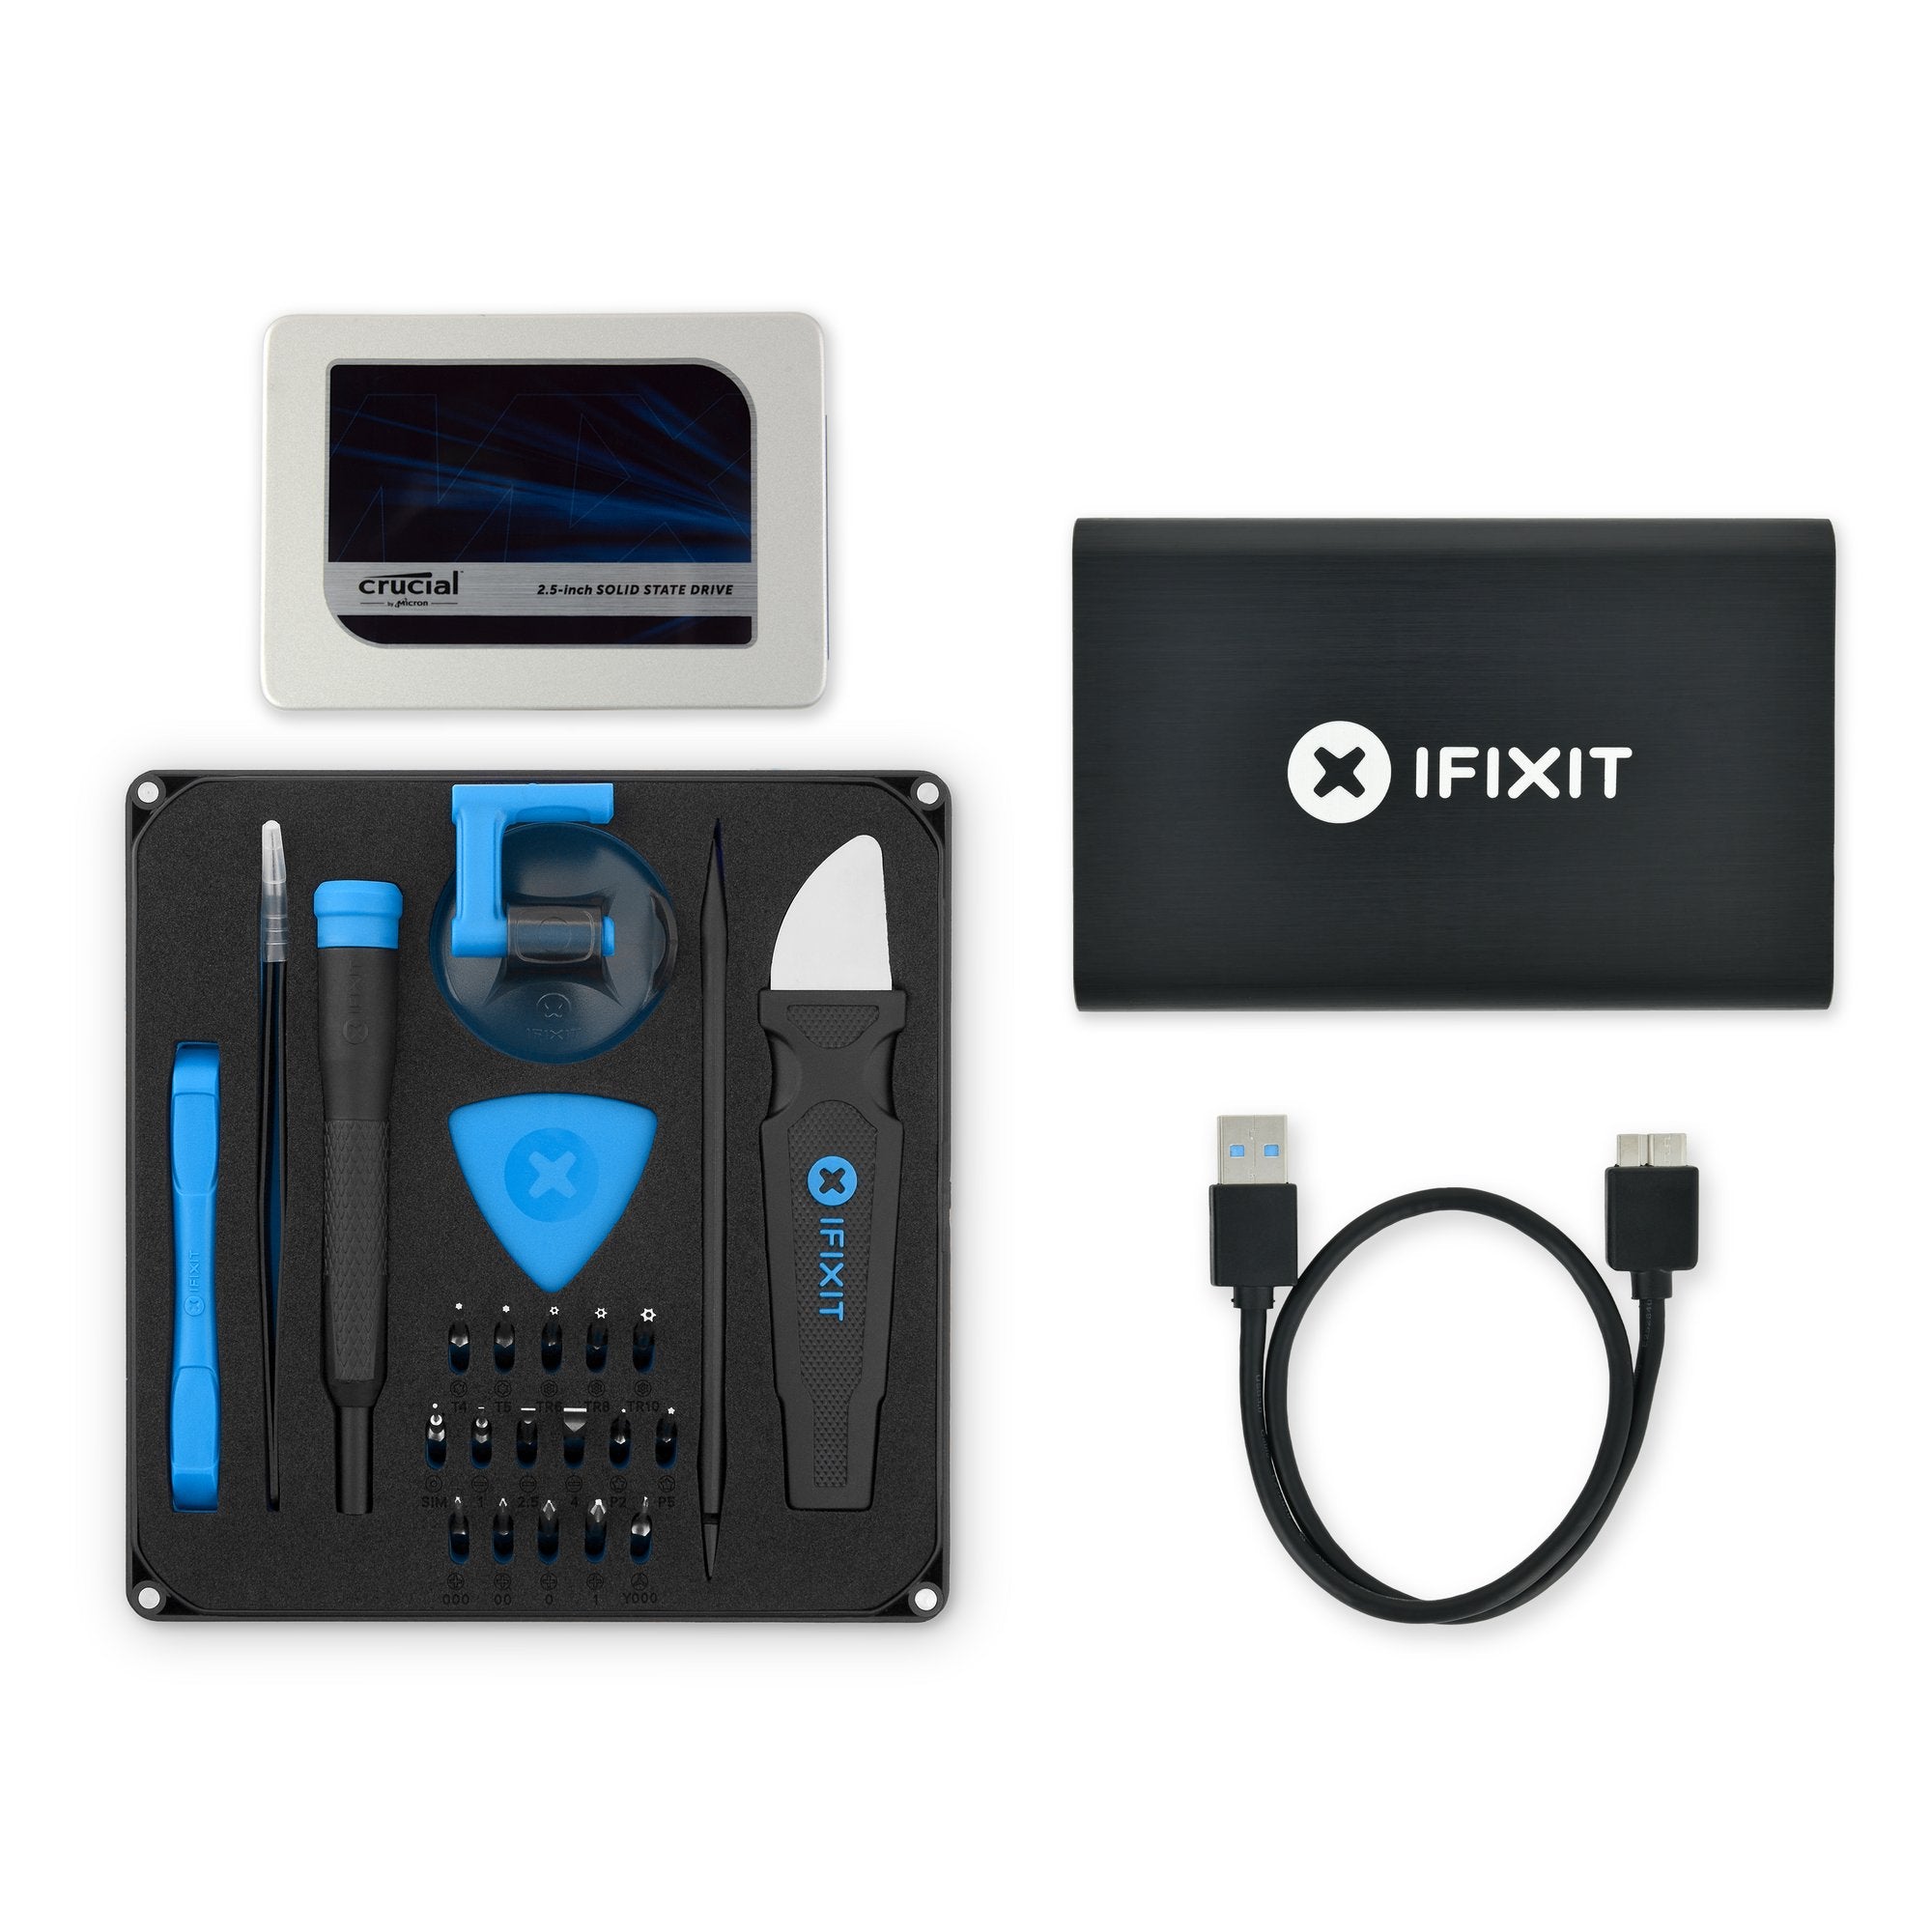 Crucial MX500 1 TB SSD—Your complete iFixit Fix Kit: a Crucial SSD, iFixit  Tools & Instructions. Two-year Quality Guarantee.